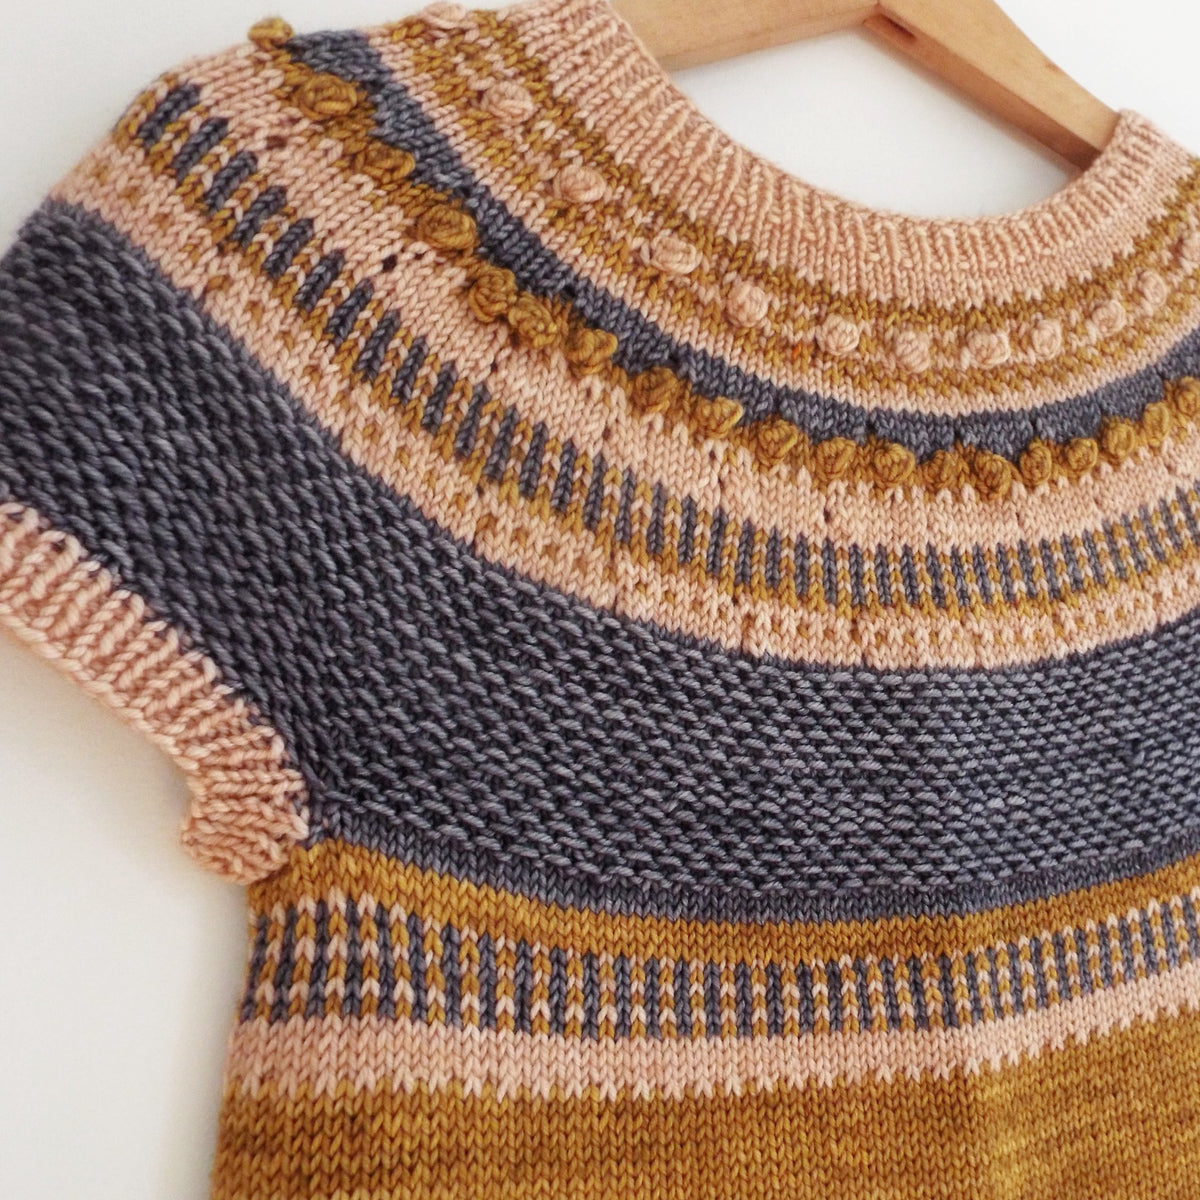 Fosette Sweater by Knitty McPurly